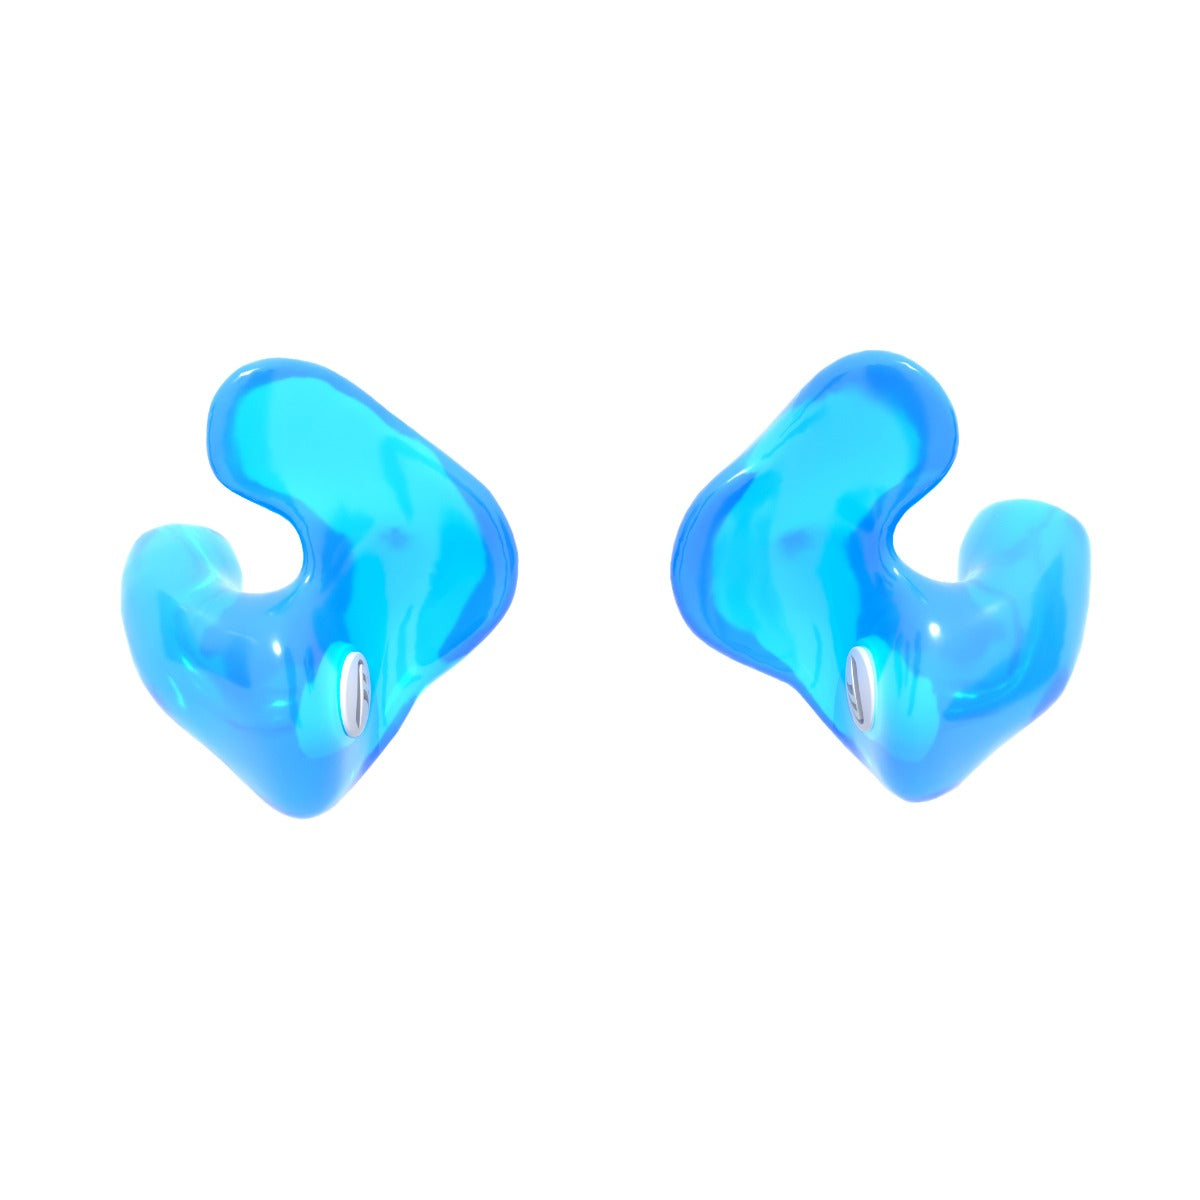 Image of Actives Custom Earplugs with Interchangeable Filters.